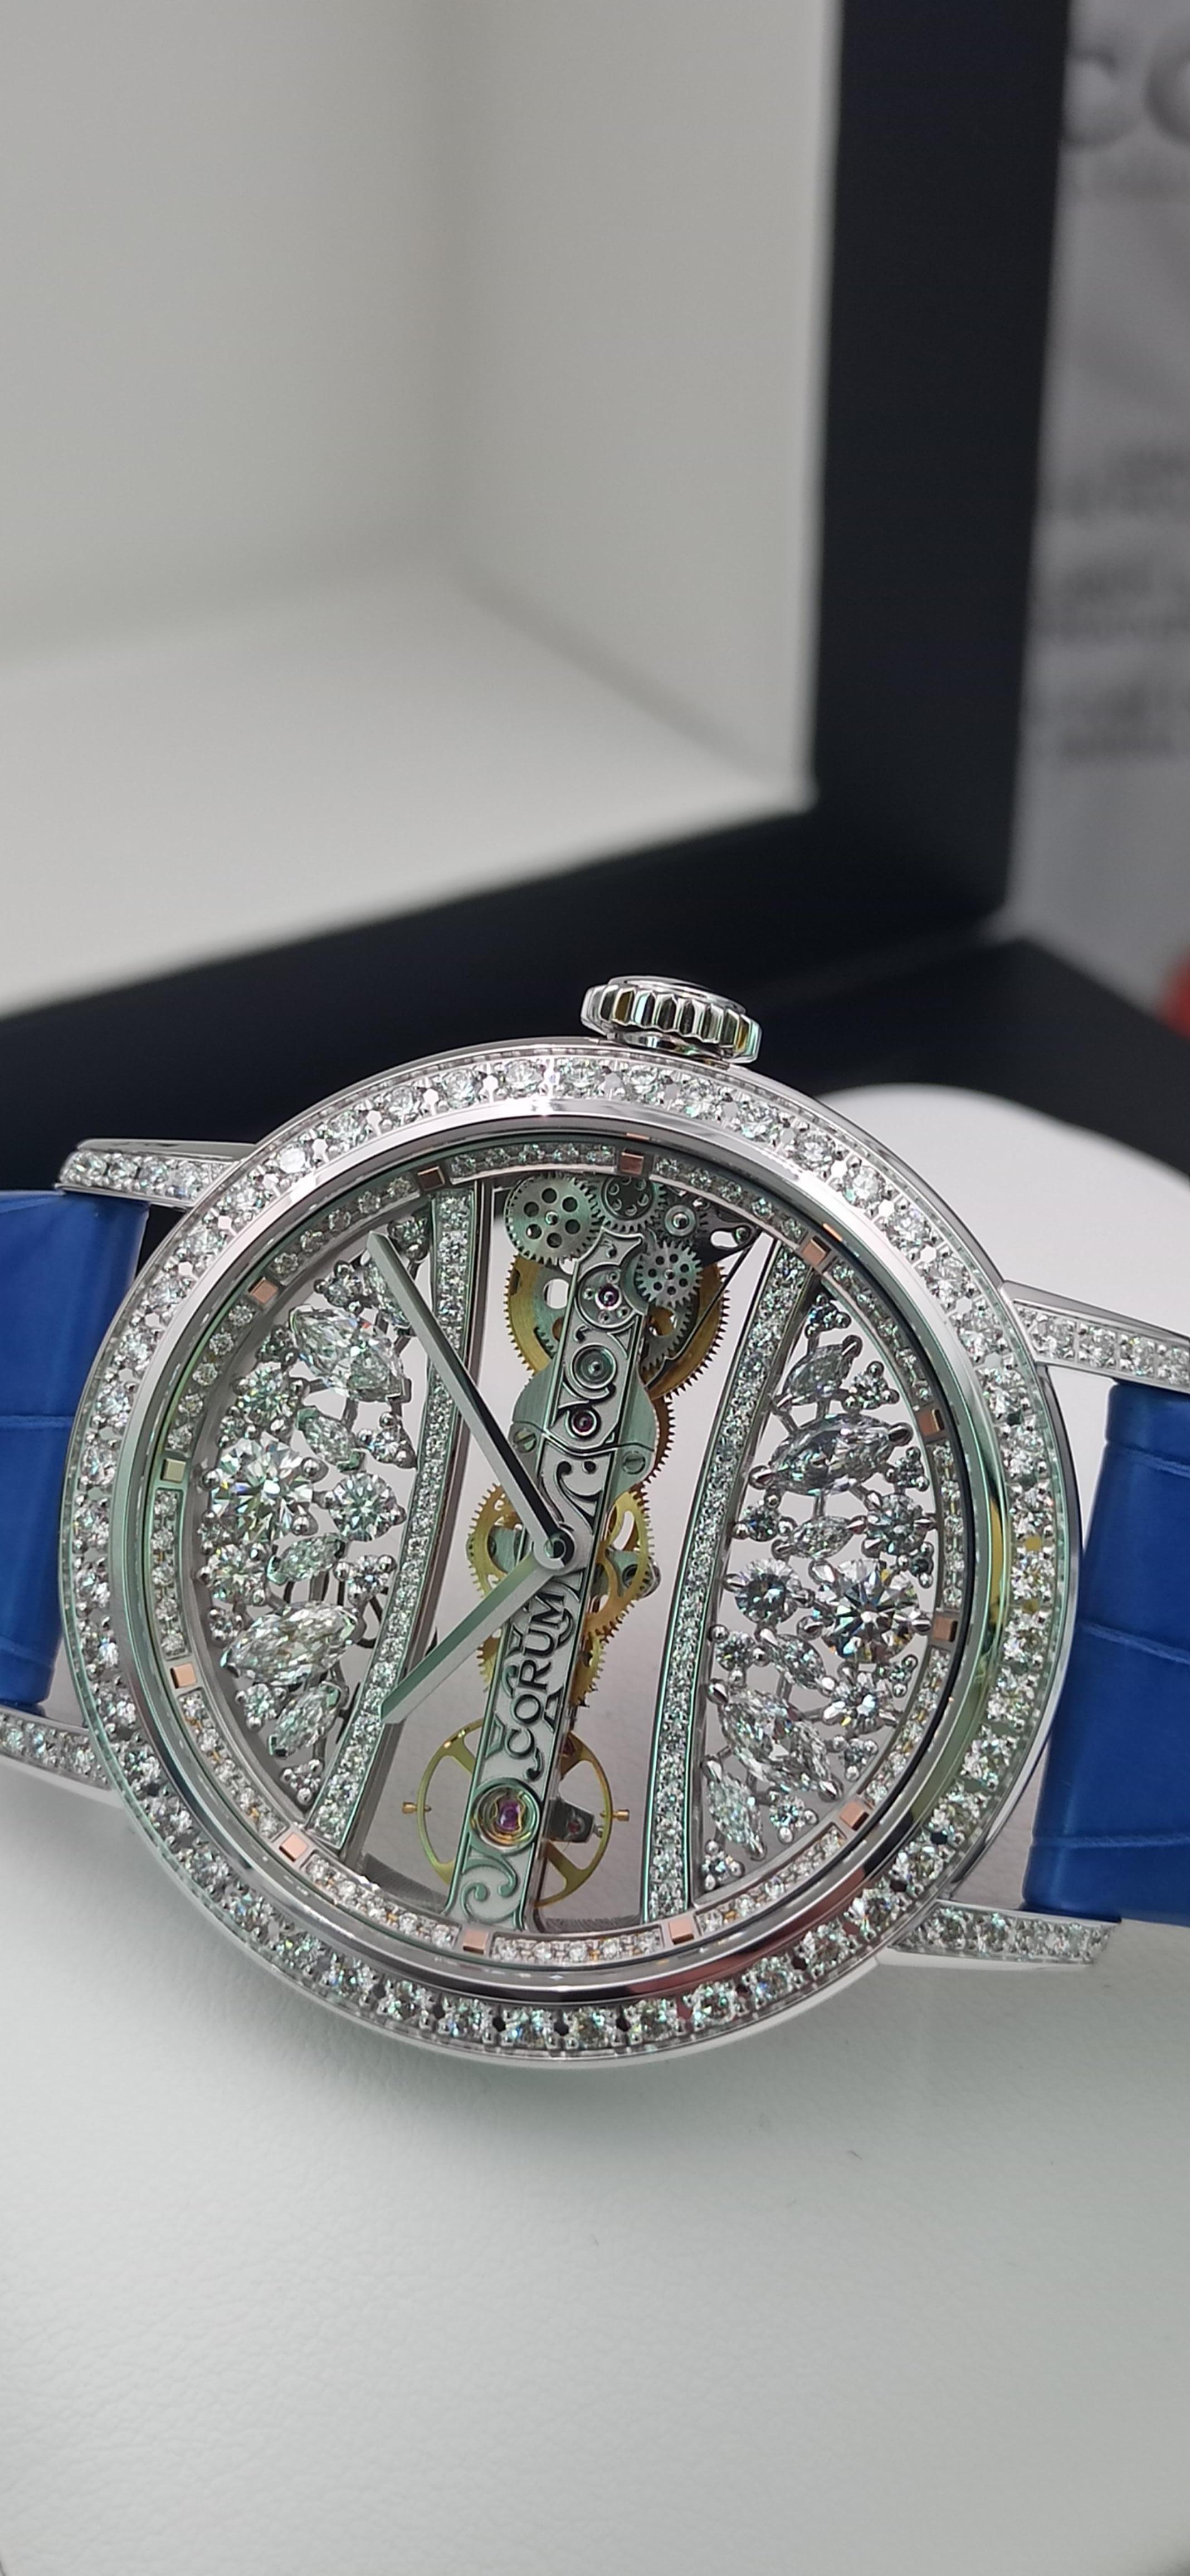 Corum Golden Bridge, round 39mm case,  18kt white gold case and deployment buckle, 
complete with Box, Papers, Certificate.

Diamonds case, and amazing custom made in very few pieces from Corum master artisans, a special diamonds dial

Really an